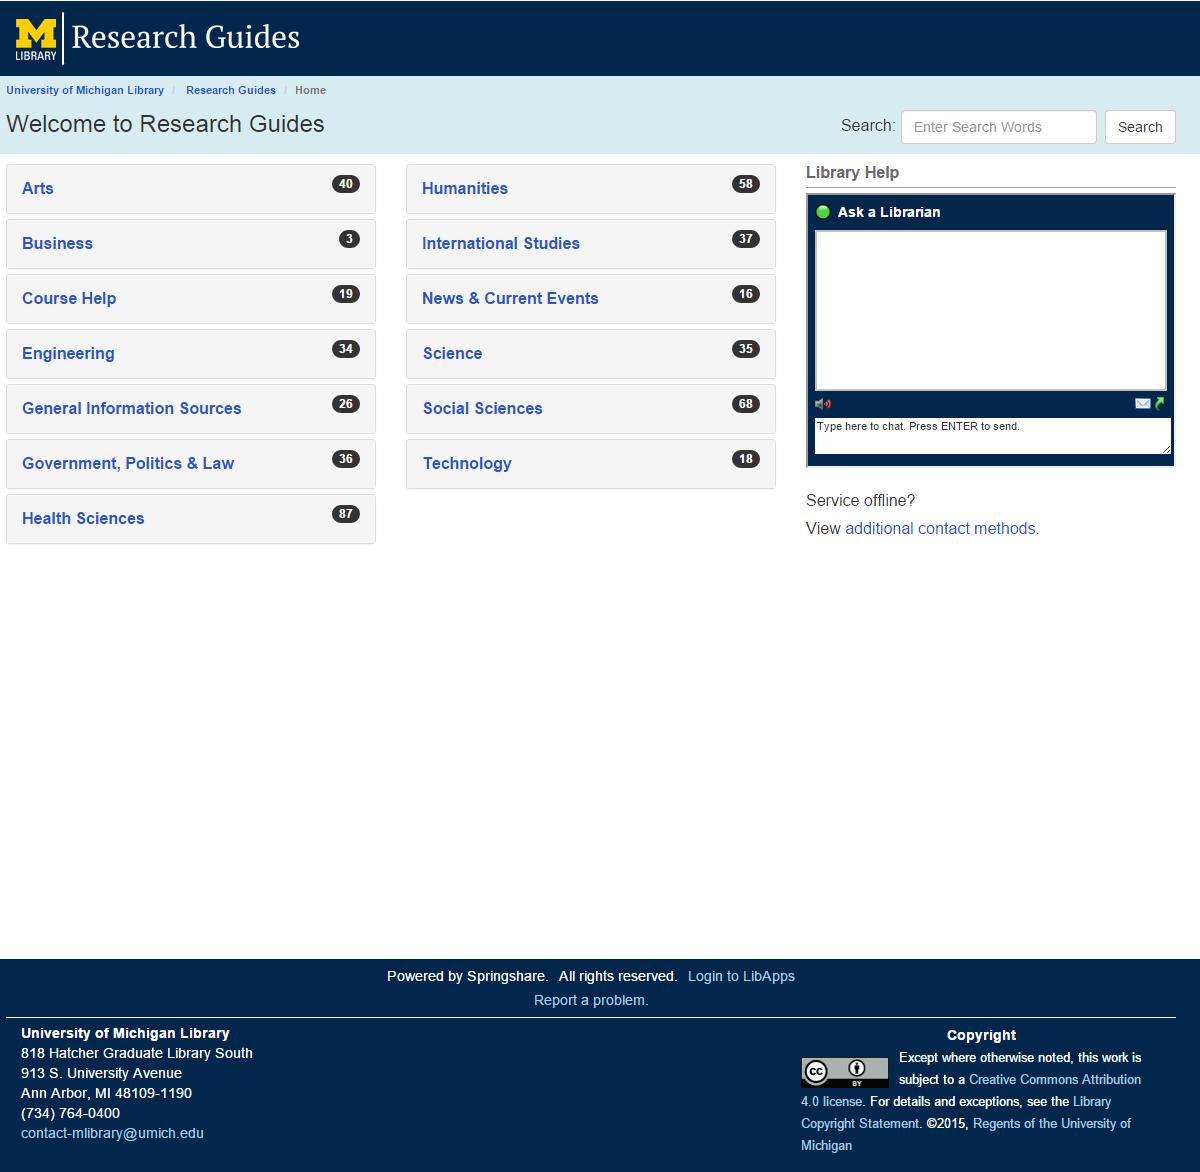 LibGuides Homepage after migration to version 2.0